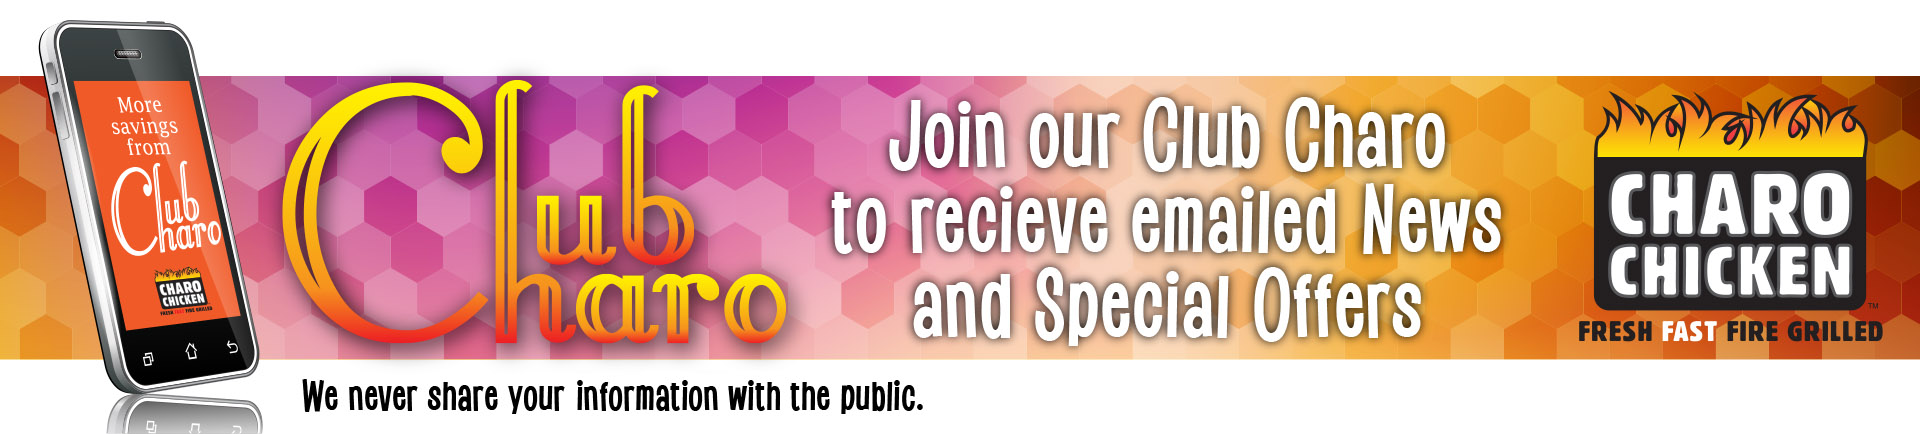 Club Charo: Join our email club to receive updates and special offers